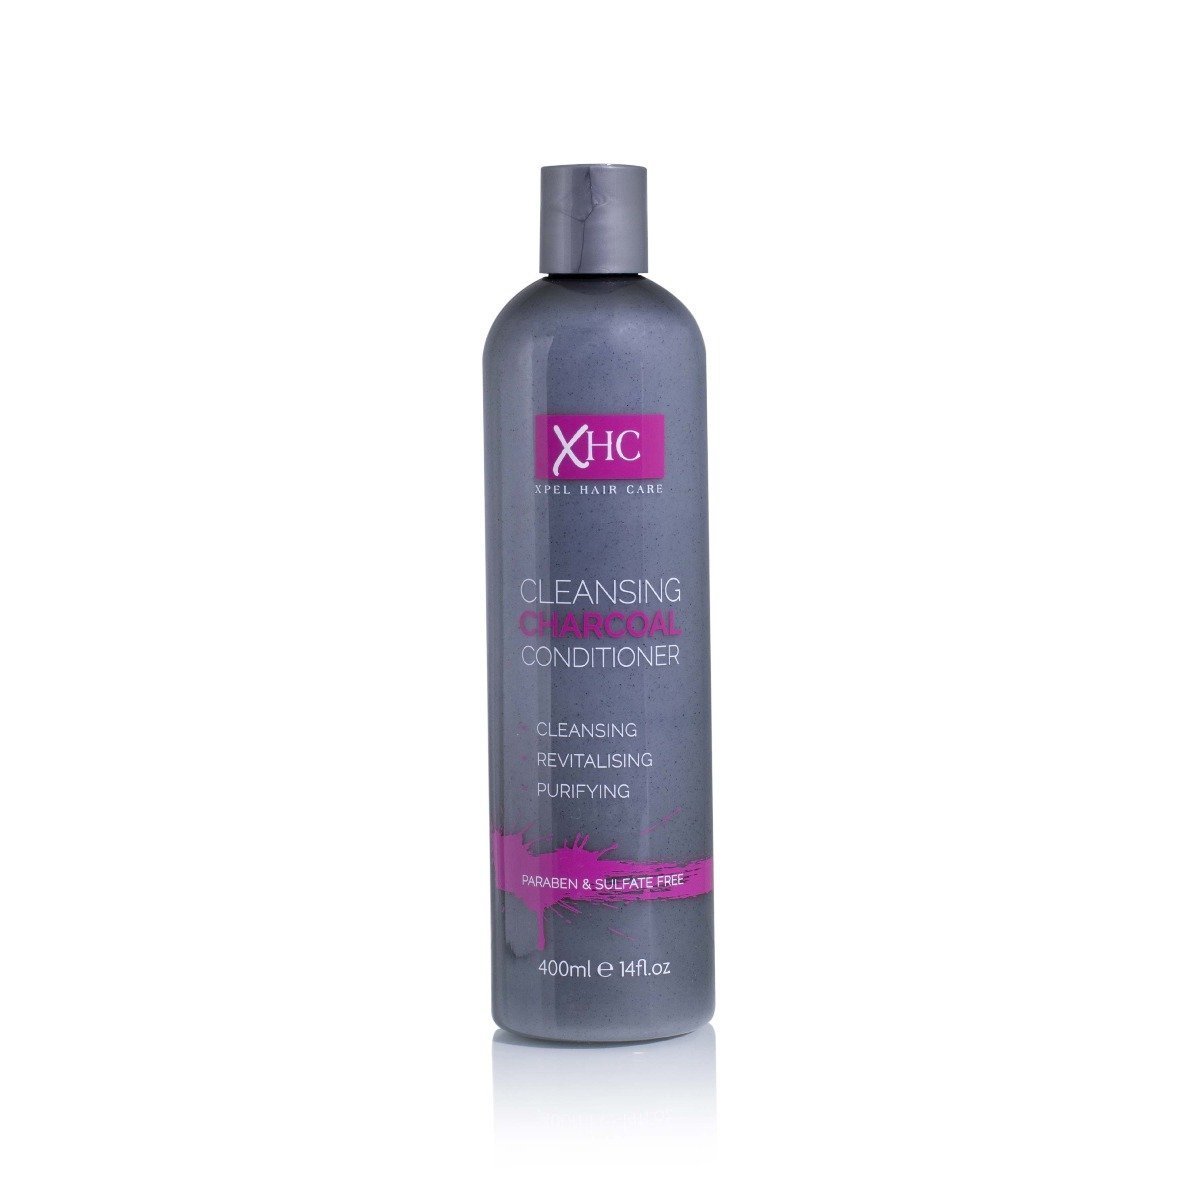 Xhc Charcoal Cleansing Conditioner 400ml